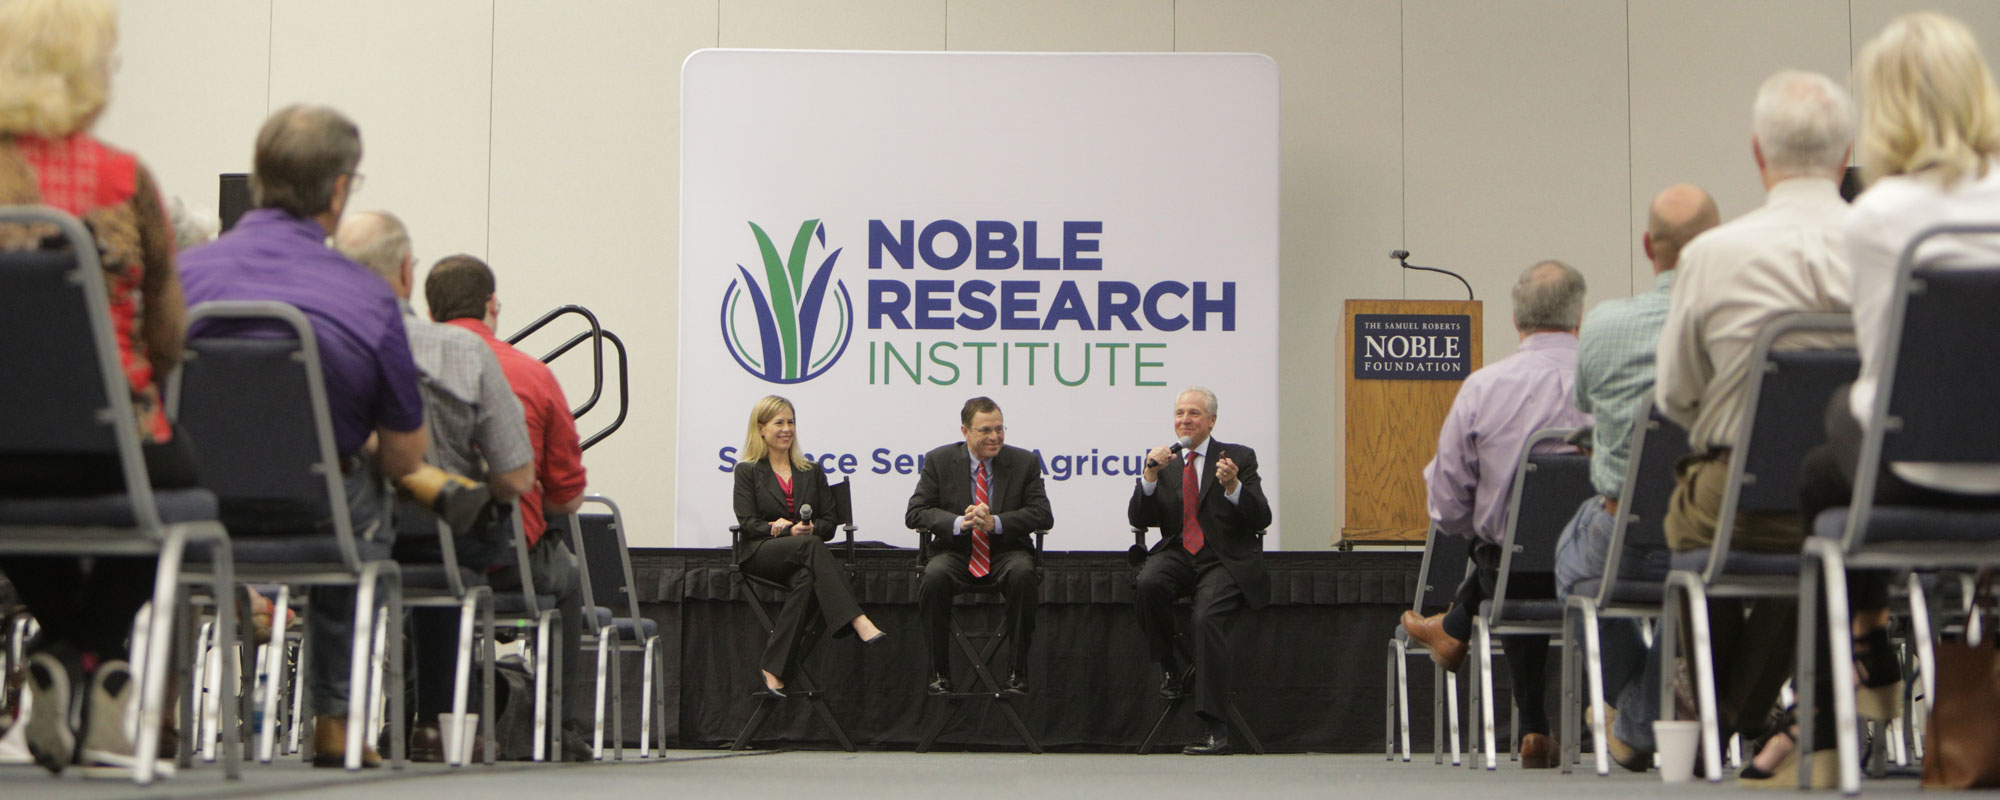 Noble Research Institute represents the next step in Noble’s 71-year legacy to advance agriculture